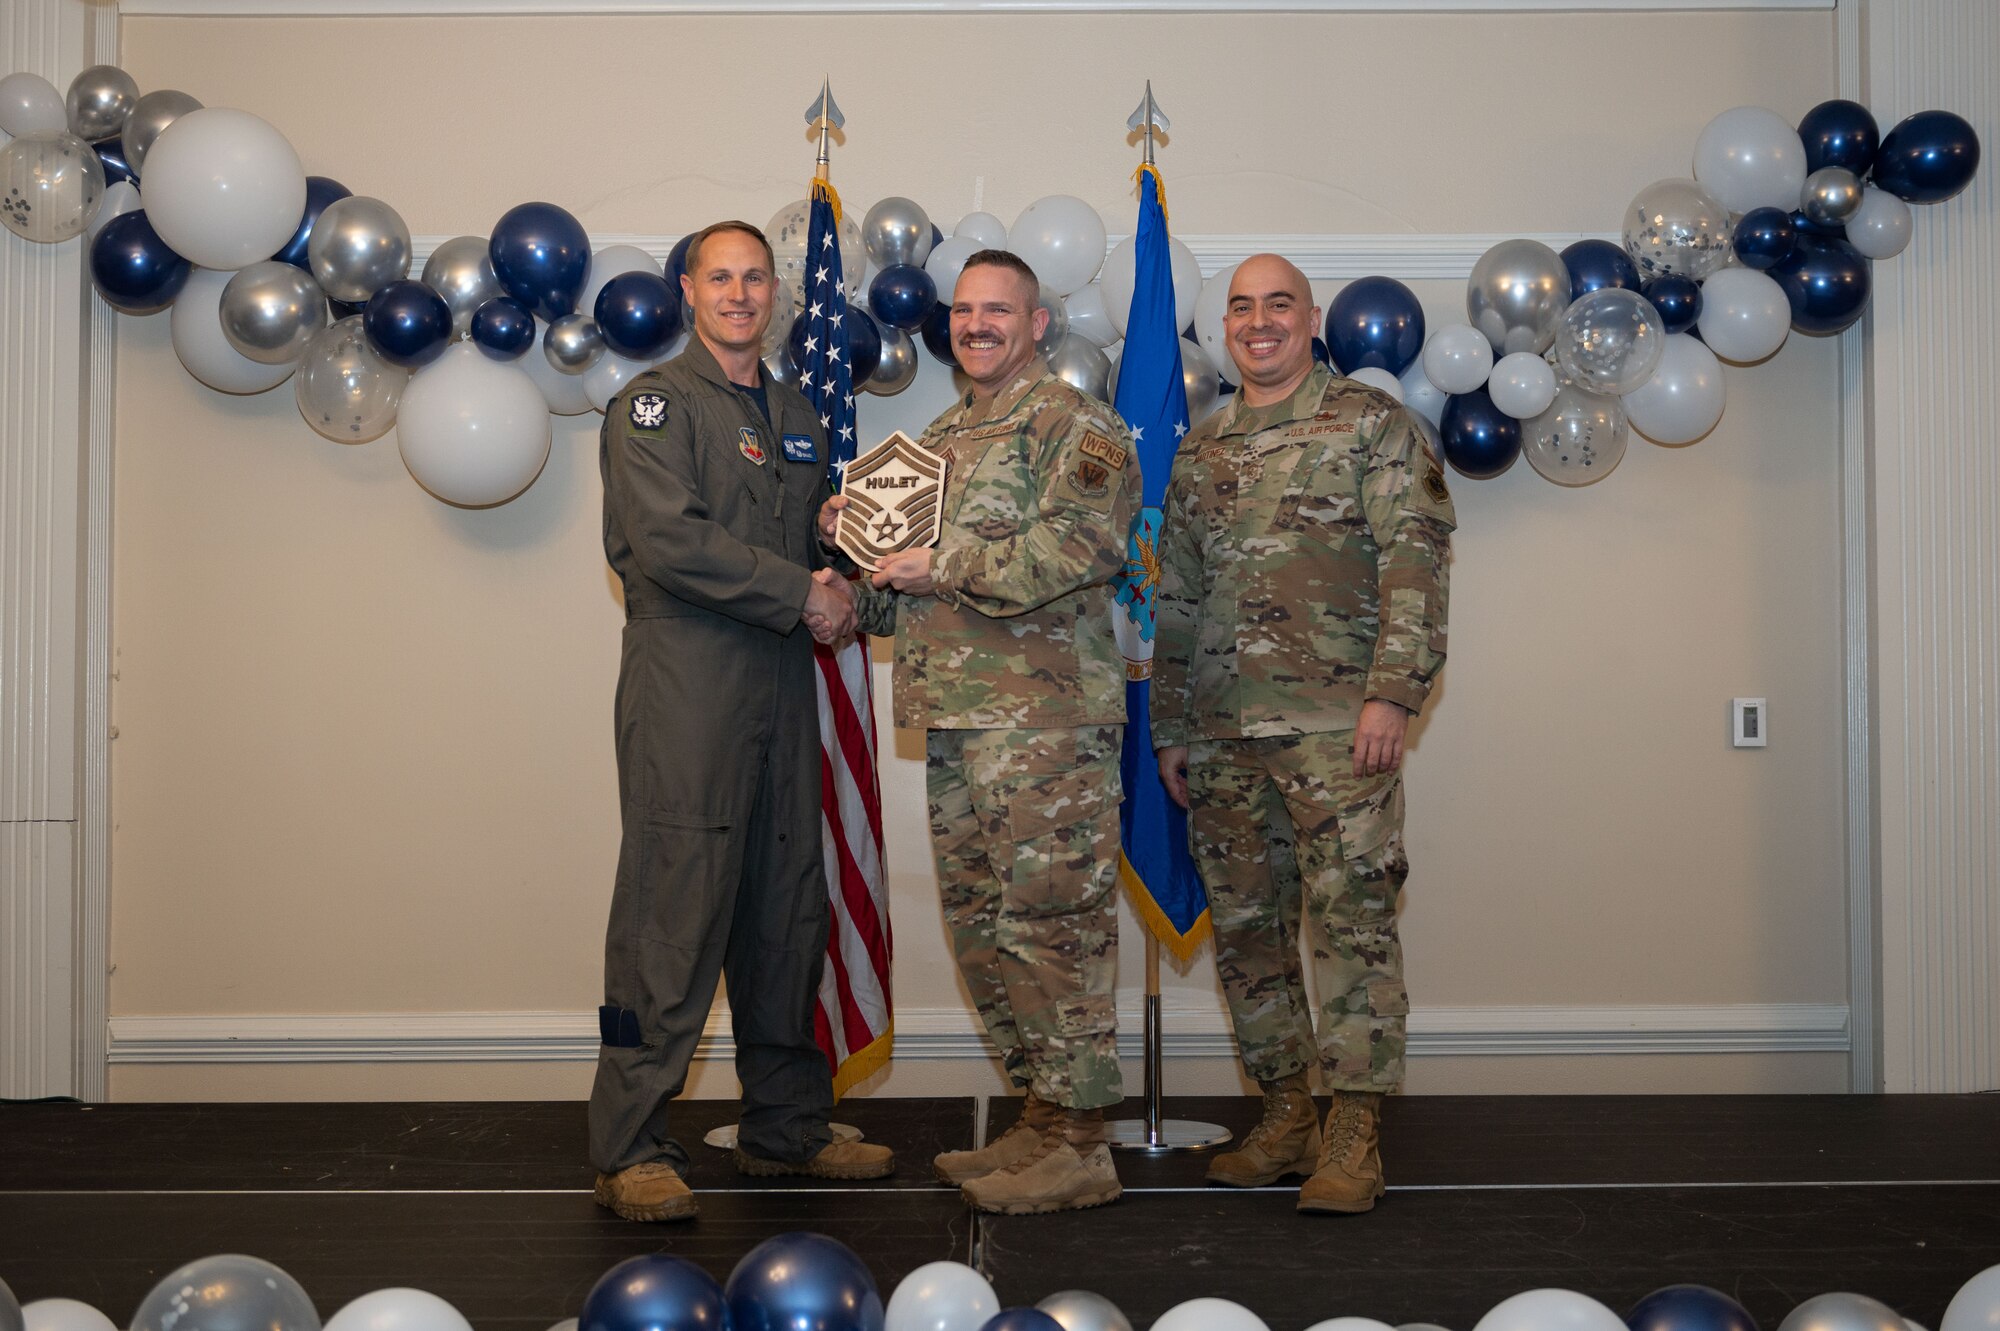 Col. Lucas Teel, 4th Fighter Wing commander, and Chief Master Sgt. Peter Martinez, 4th FW command chief, present a plaque to Senior Master Sgt. select Robb Hulet, 4th Maintenance Group lead standardization crew chief, during the senior master sergeant release ceremony at Seymour Johnson Air Force Base, North Carolina, March 17, 2023. Air Force officials selected 1,629 master sergeants for promotion to senior master sergeant, out of 16,031 eligible, for a selection rate of 10 percent this promotion cycle. (U.S. Air Force photo by Airman 1st Class Rebecca Sirimarco-Lang)